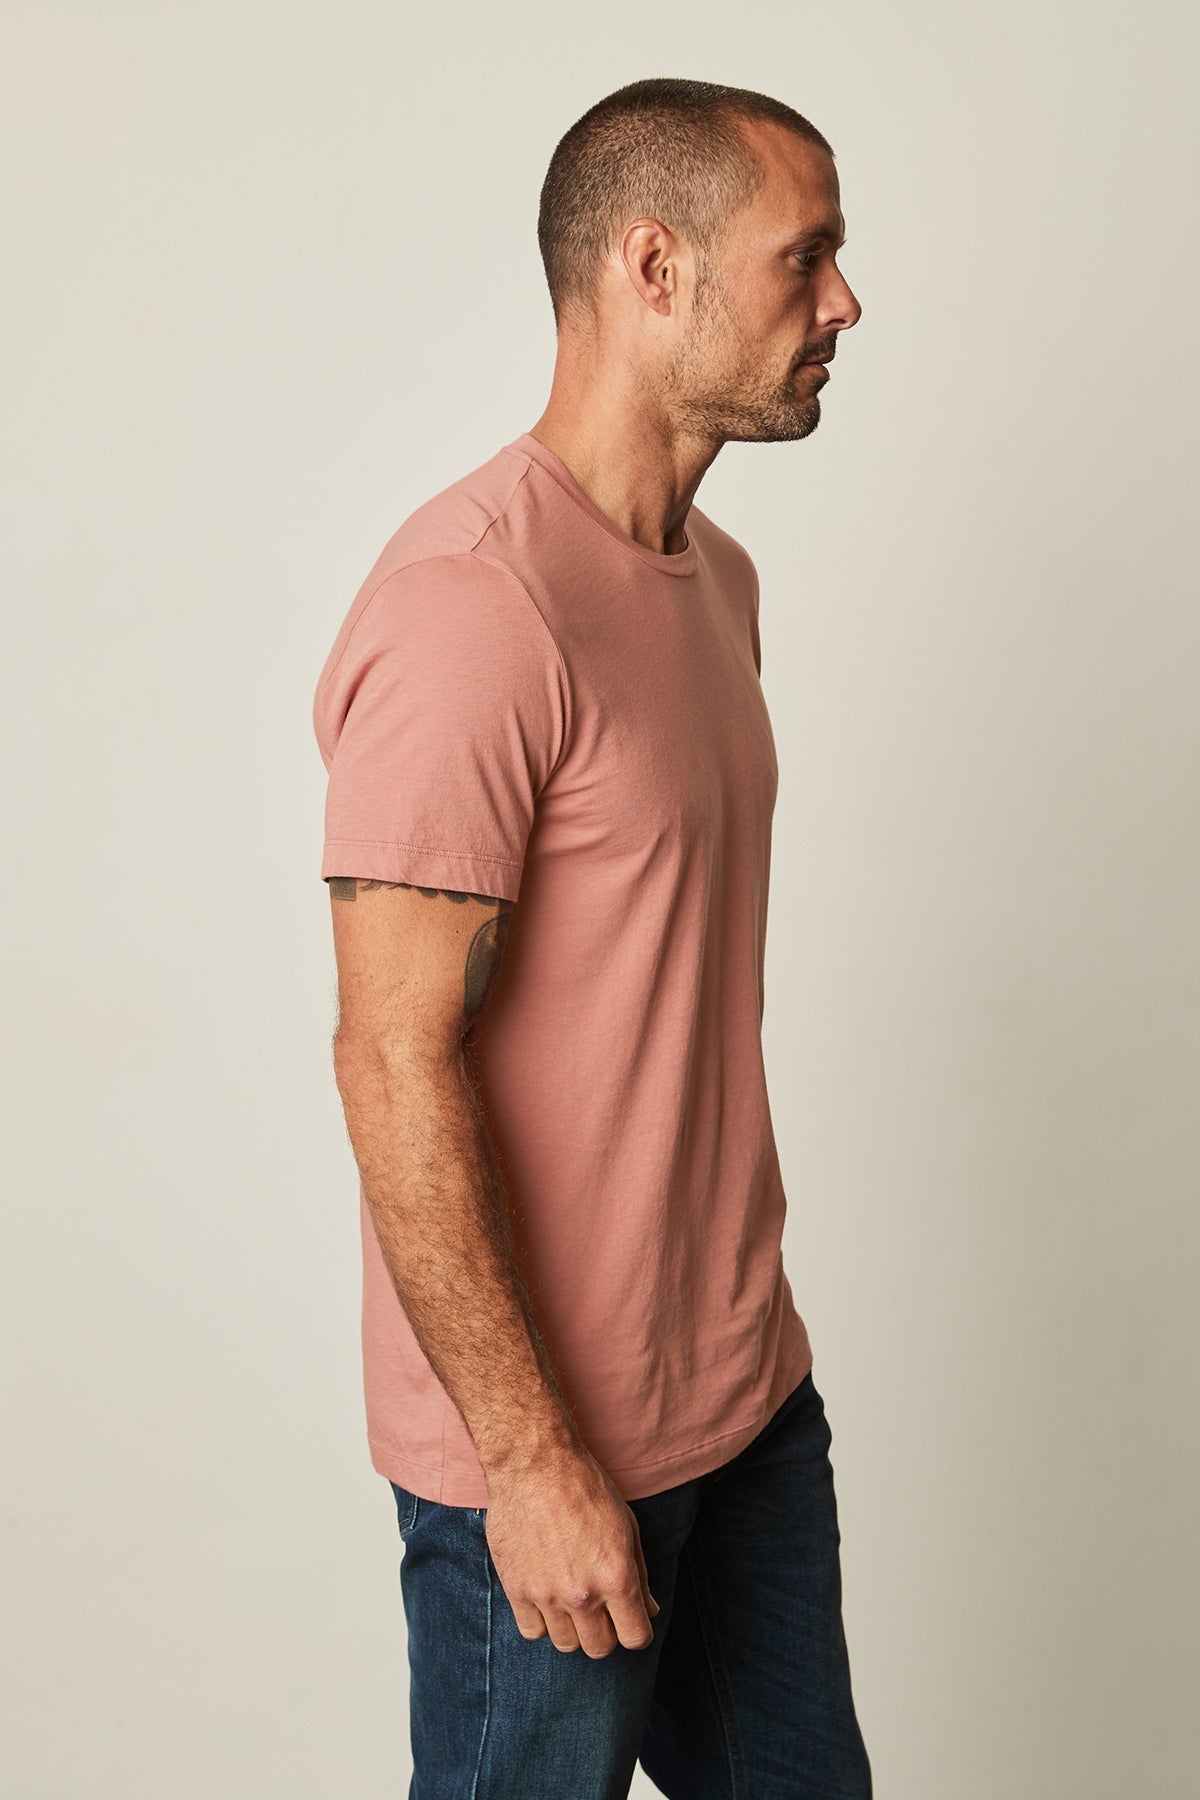 Howard Crew Neck Tee in scallop with blue denim side-26630398804161